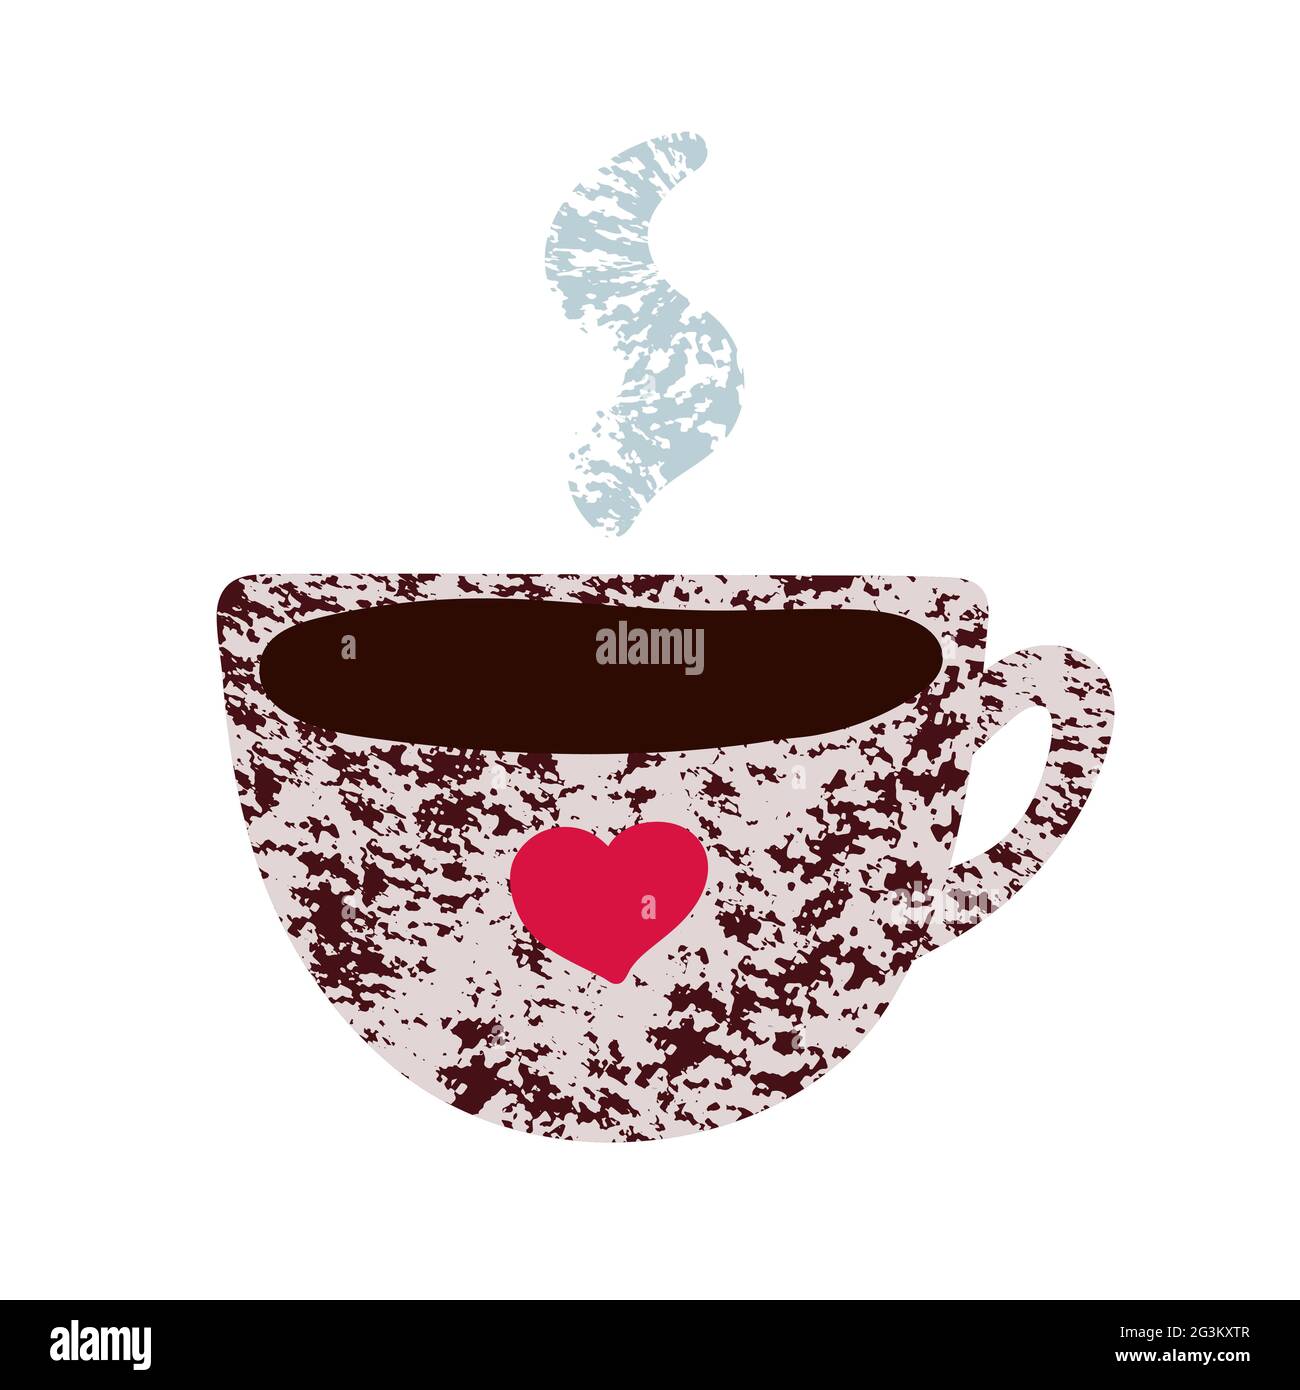 https://c8.alamy.com/comp/2G3KXTR/cute-mug-with-hot-coffee-hand-drawn-cup-with-tea-coffee-isolated-on-white-background-brown-texture-pink-heart-steam-cozy-vector-sticker-good-mo-2G3KXTR.jpg